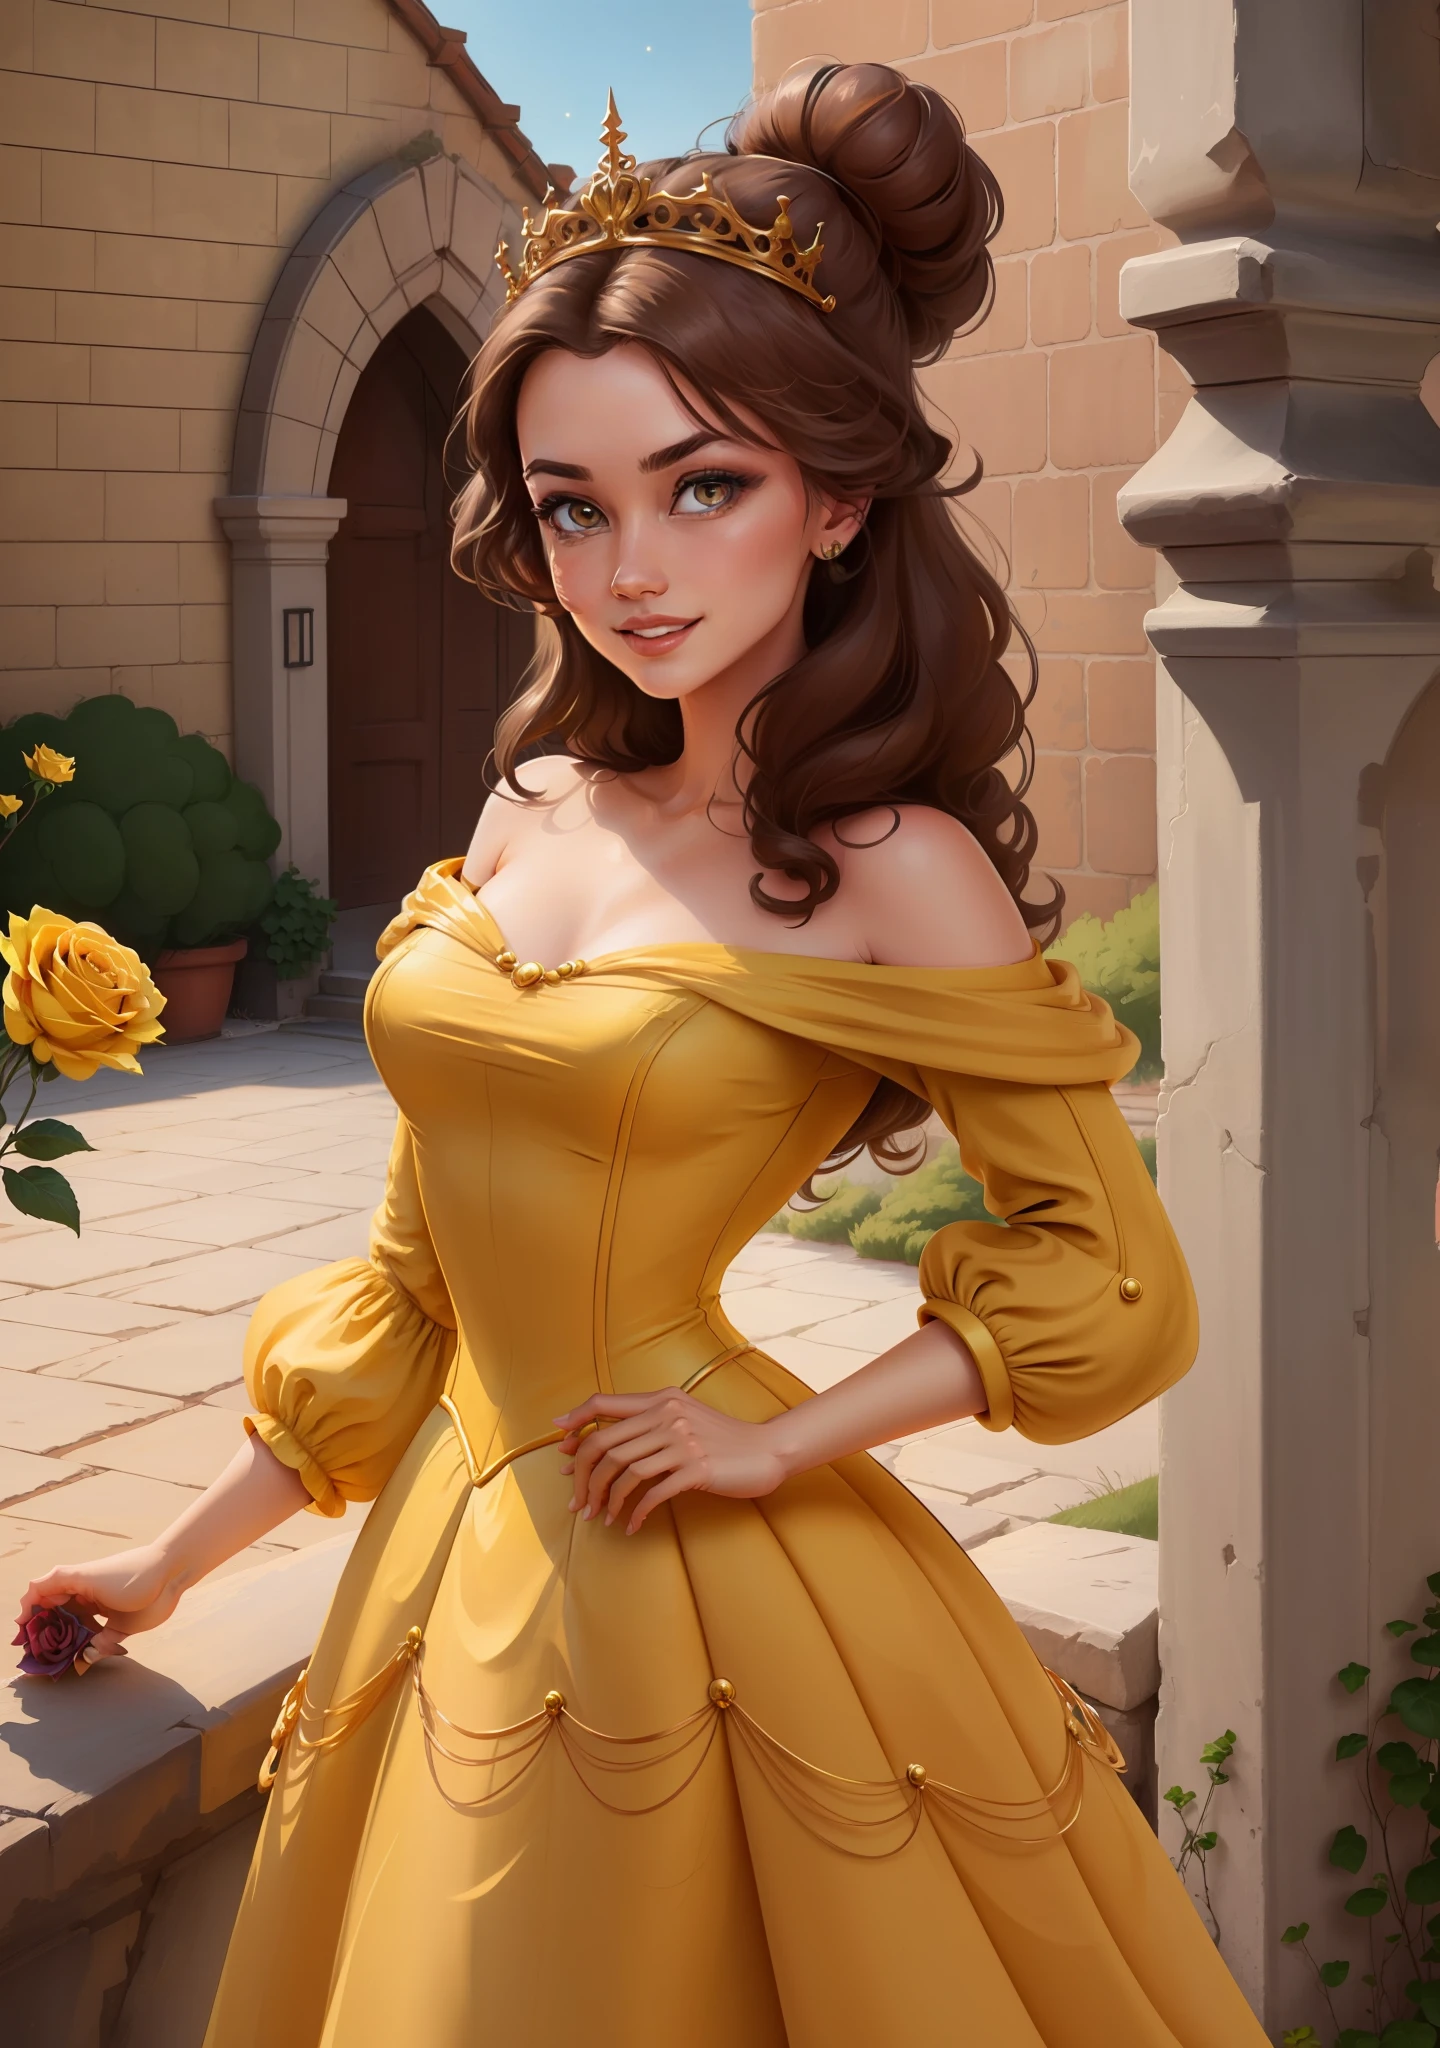 (BelleWaifu:1), surprised, handsome, handsome pose, looking at the viewer, thick thighs, (long yellow dress:1.2), (hair bun, tiara) :D, curvy, (holding a red rose:1),

(realistic: 1.2), (realism), (masterpiece: 1.2), (best quality), (ultra detailed), (8k, 4k, intricate), (full-body-shot: 1), (Cowboy-shot: 1.2), (85mm), light particles, lighting, (highly detailed: 1.2), (detailed face: 1.2), (gradients), sfw, colorful, (detailed eyes: 1.2),

(detailed landscape, garden, plants, castle: 1.2), (detailed background), detailed landscape, (dynamic angle: 1.2), (dynamic pose: 1.2), (rule of third_composition: 1.3), (line of action: 1.2), wide shot, daylight, soil,